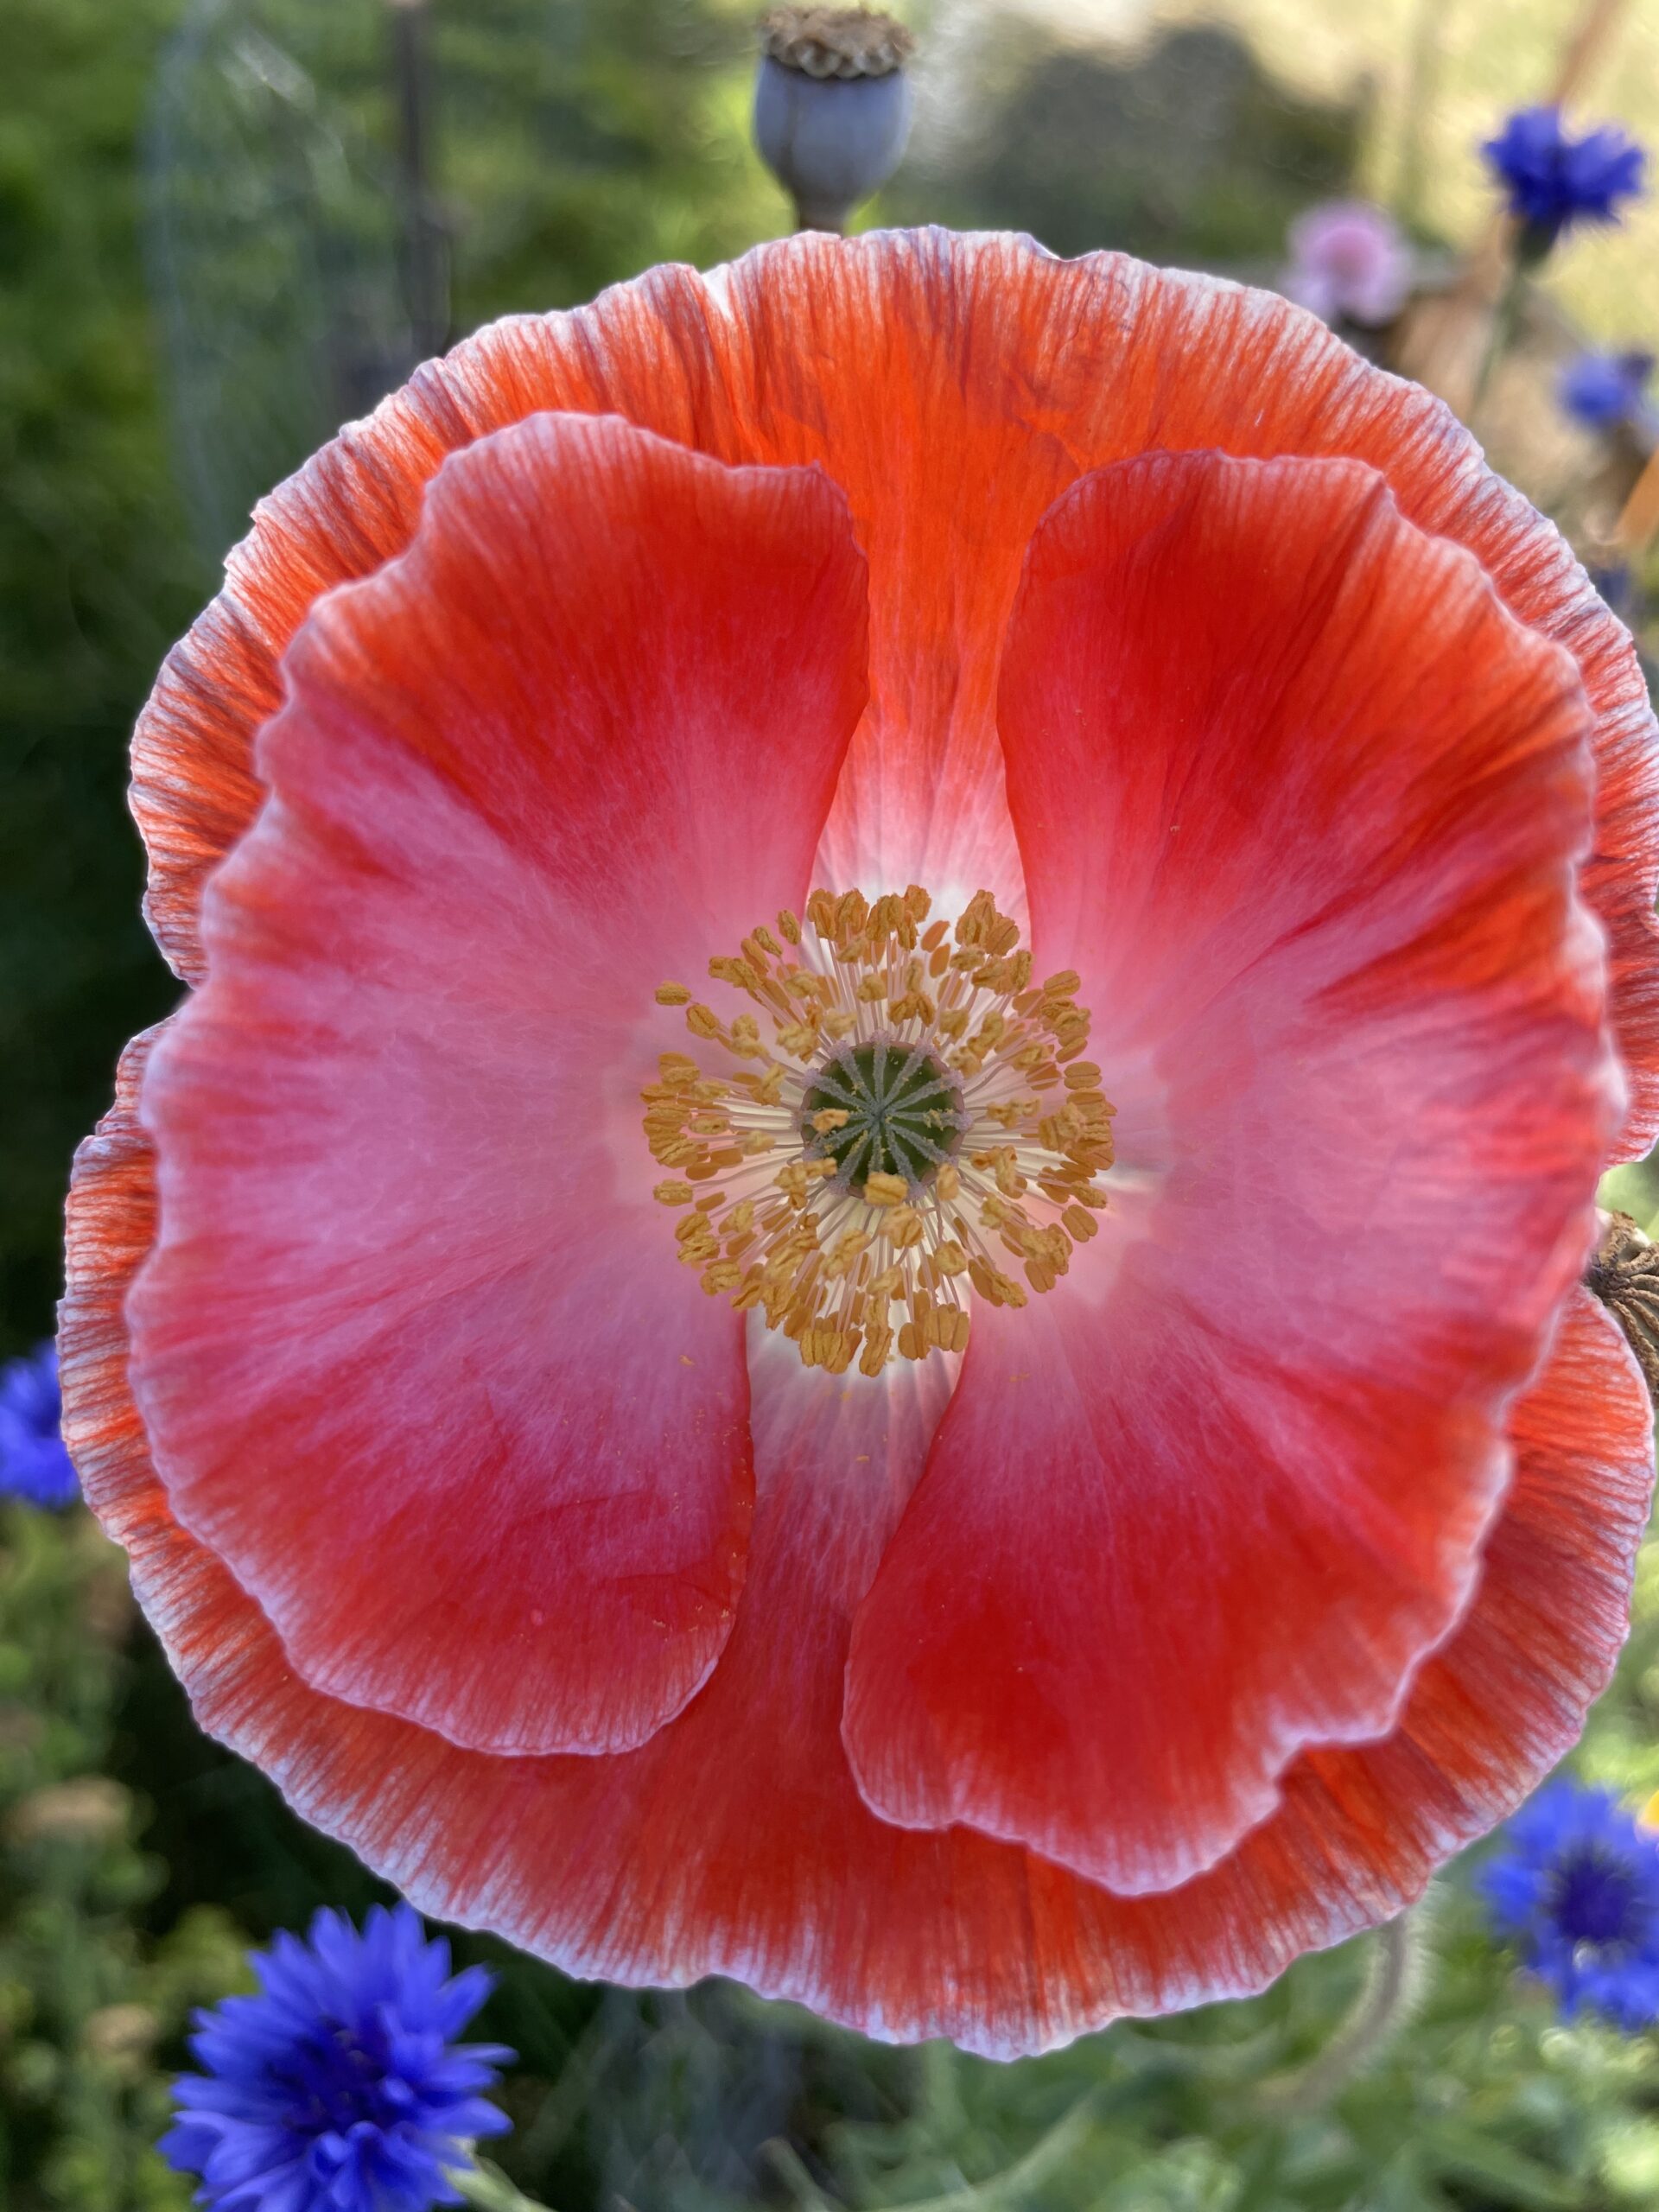 My favorite poppies - Eden Brothers